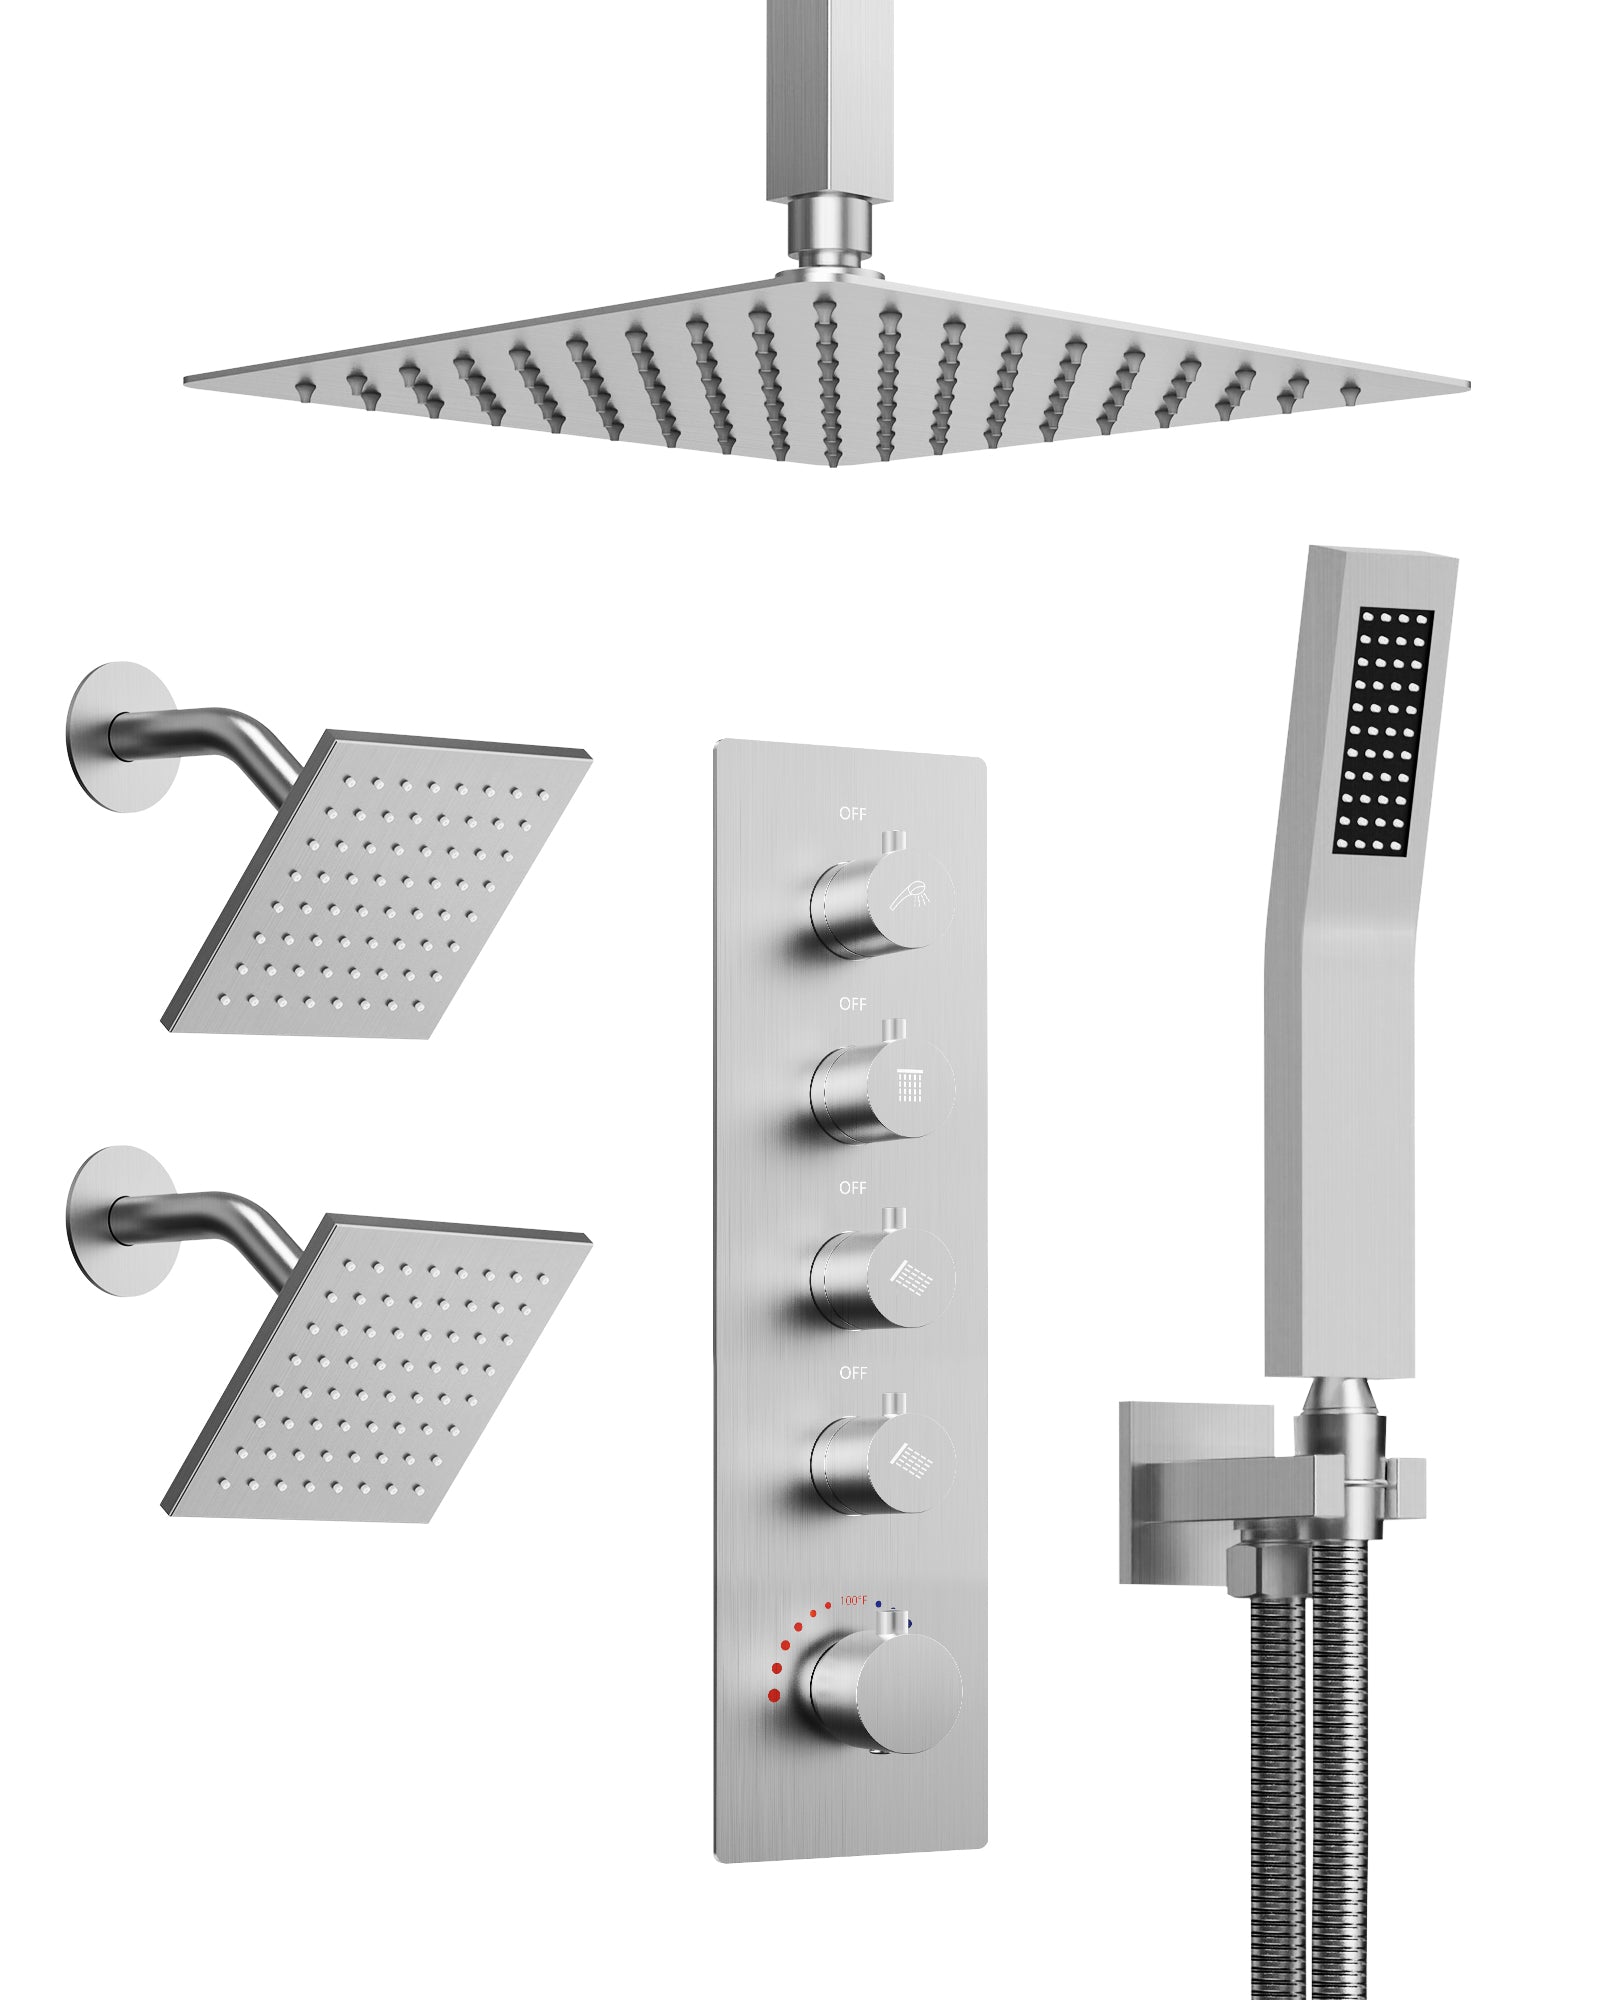 EVERSTEIN SFS-1062-NK16 16" High-Pressure Rainfall Complete Shower System with Rough-in Valve